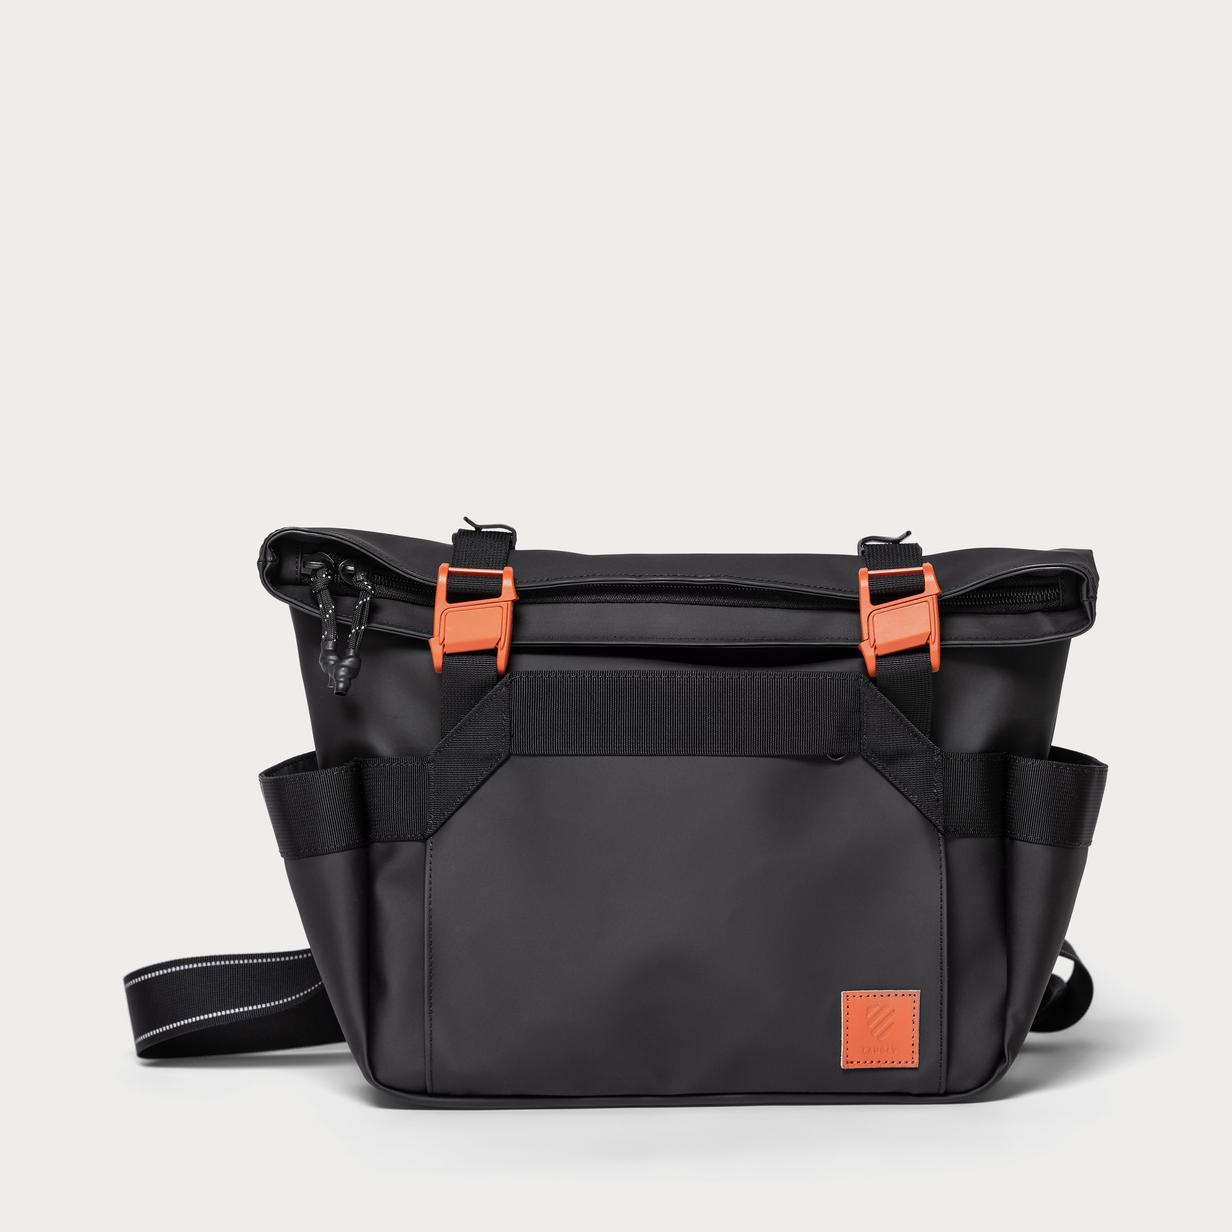 Moment Langly BSBCLAY01 Bravo Mirrorless Shoulder Bag 01